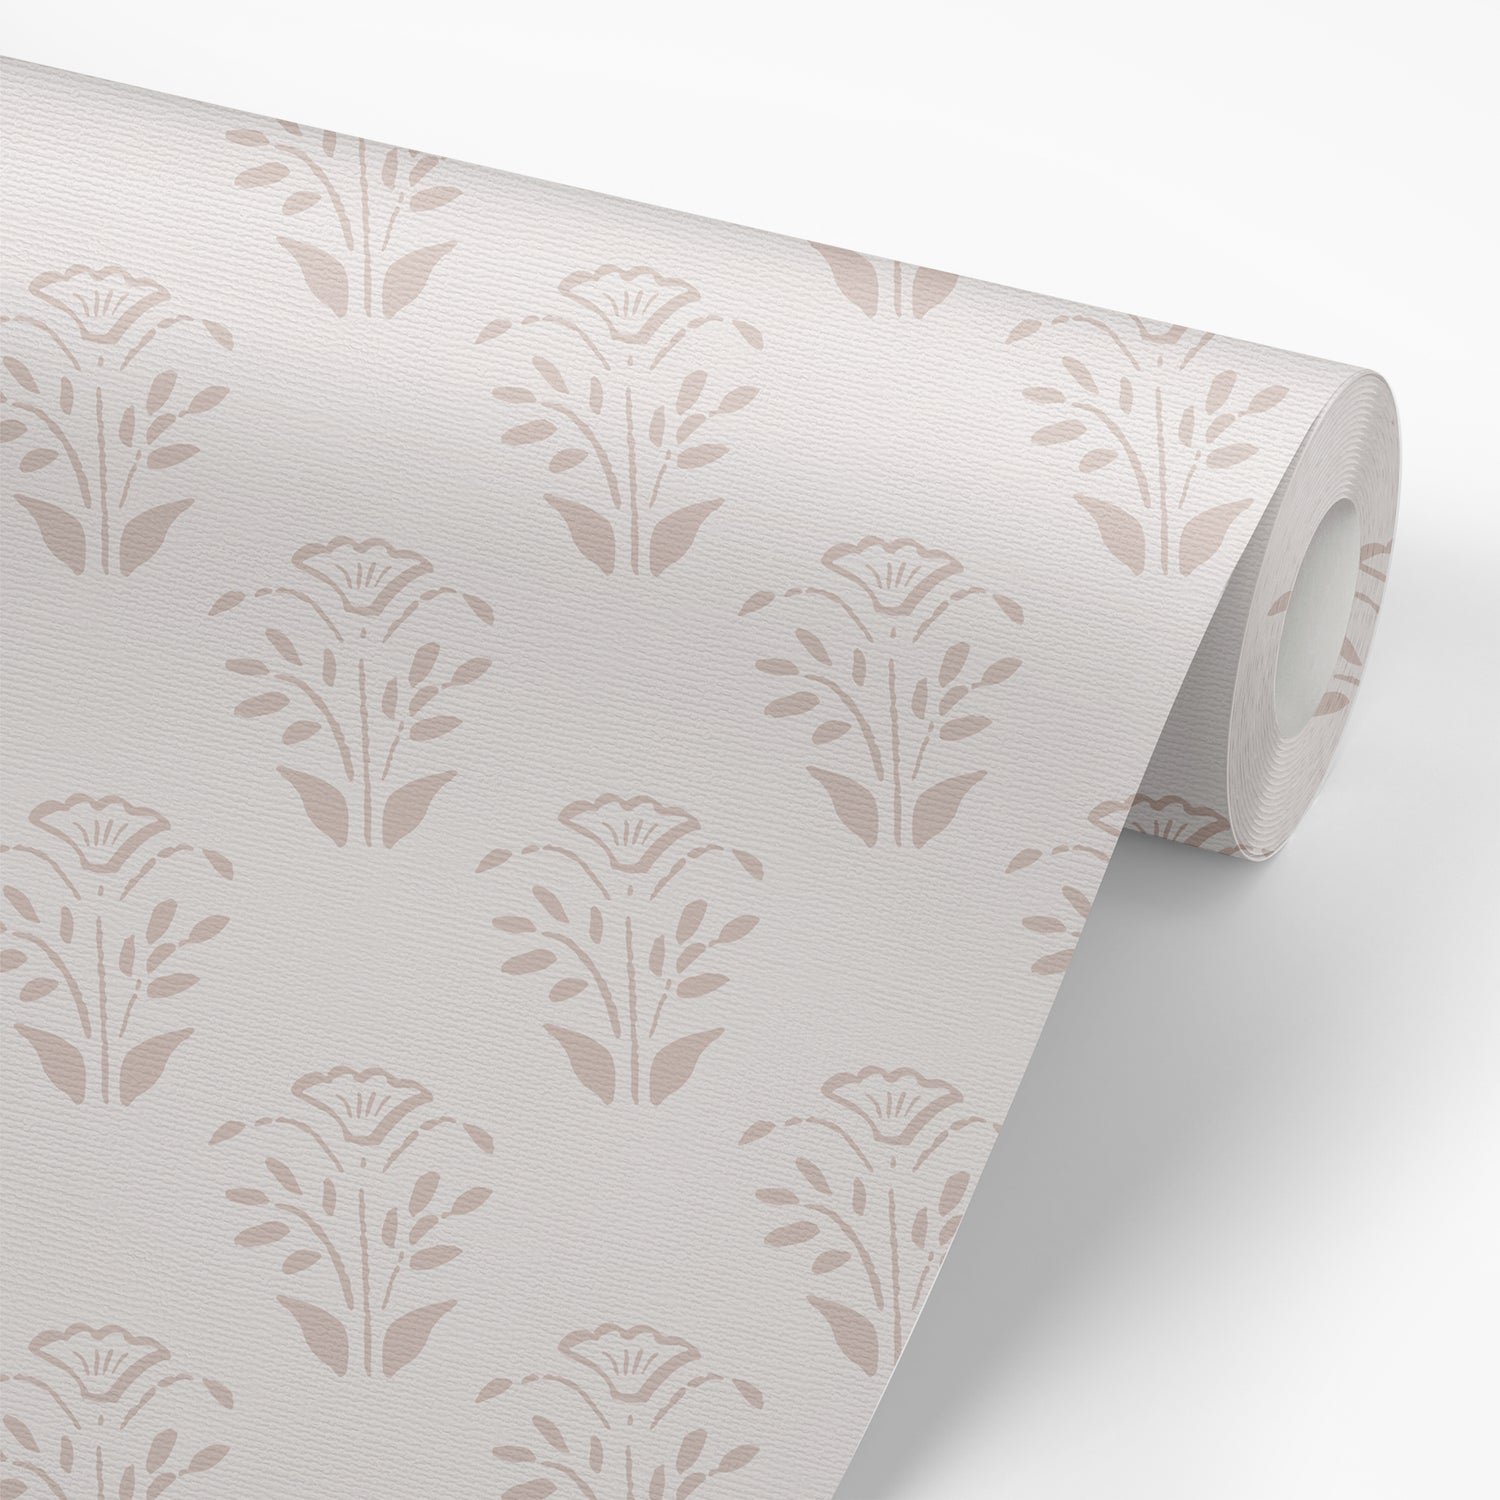 Wallpaper panel featuring the Lulu Peel and Stick Wallpaper in bone by Jackie O'Bosky. Floral motifs placed symettrically in neutral taupe and bone colors. 